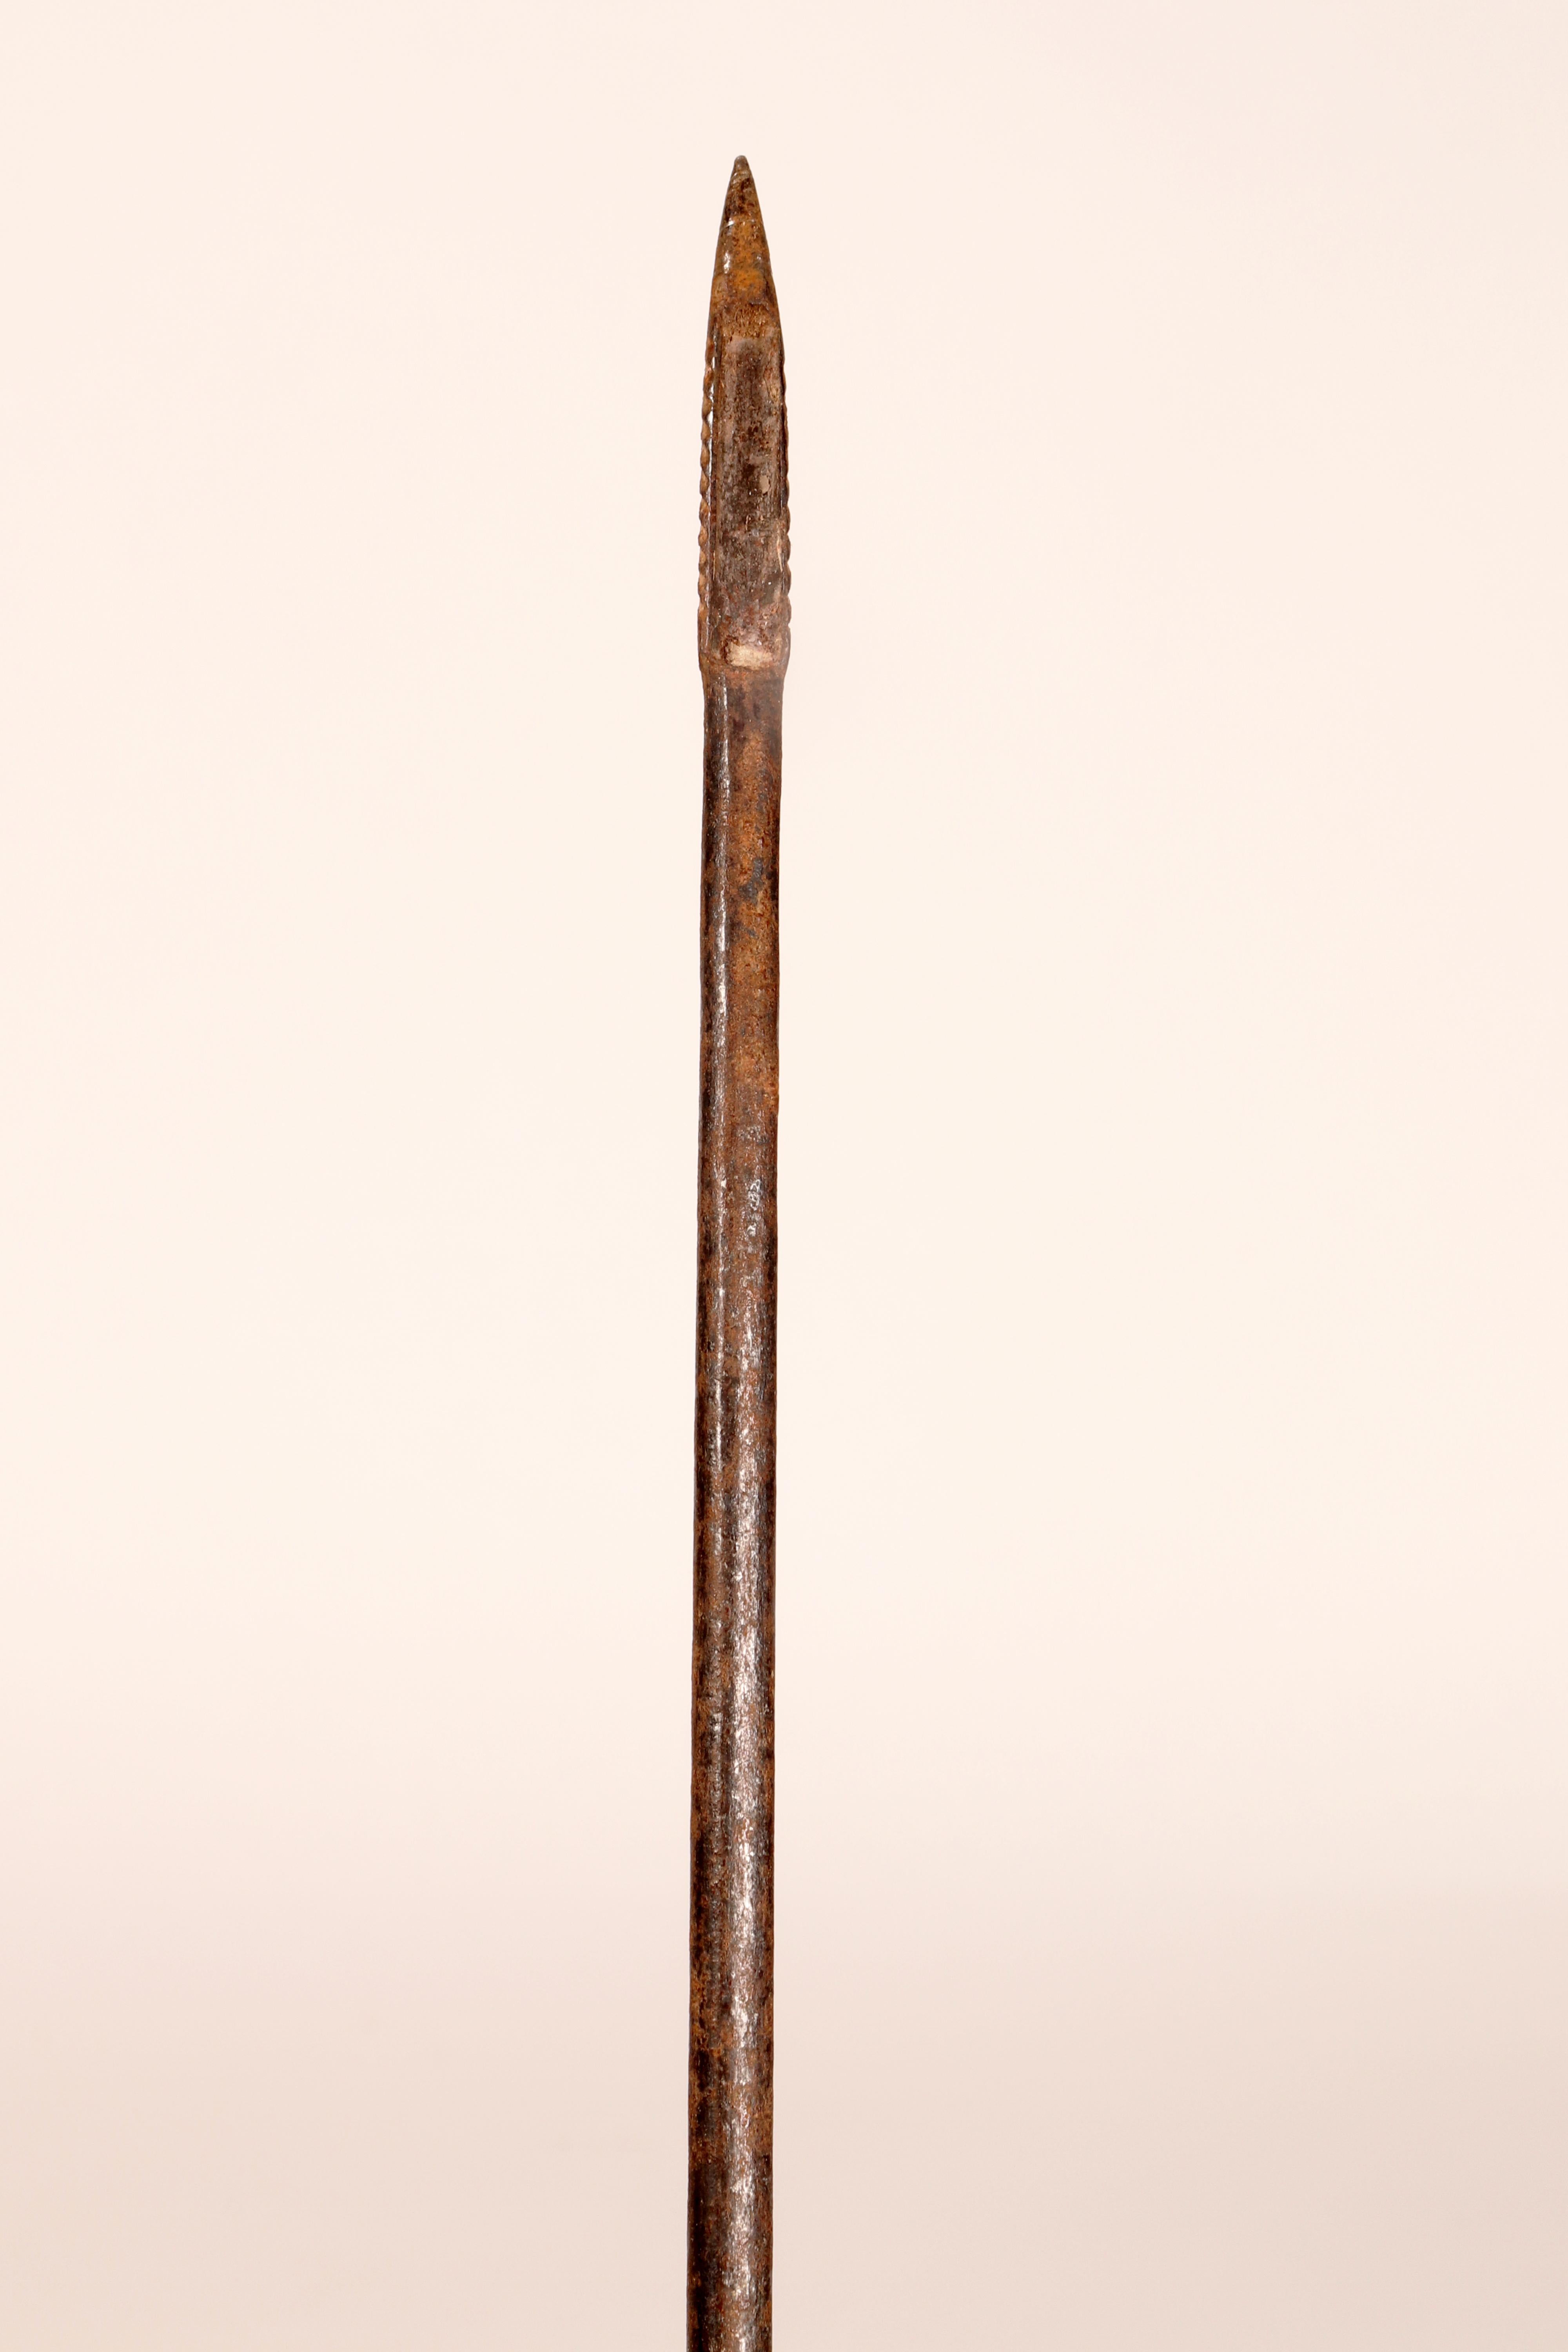 Customs officer's walking stick for goods inspection, Germany, 1870. For Sale 6